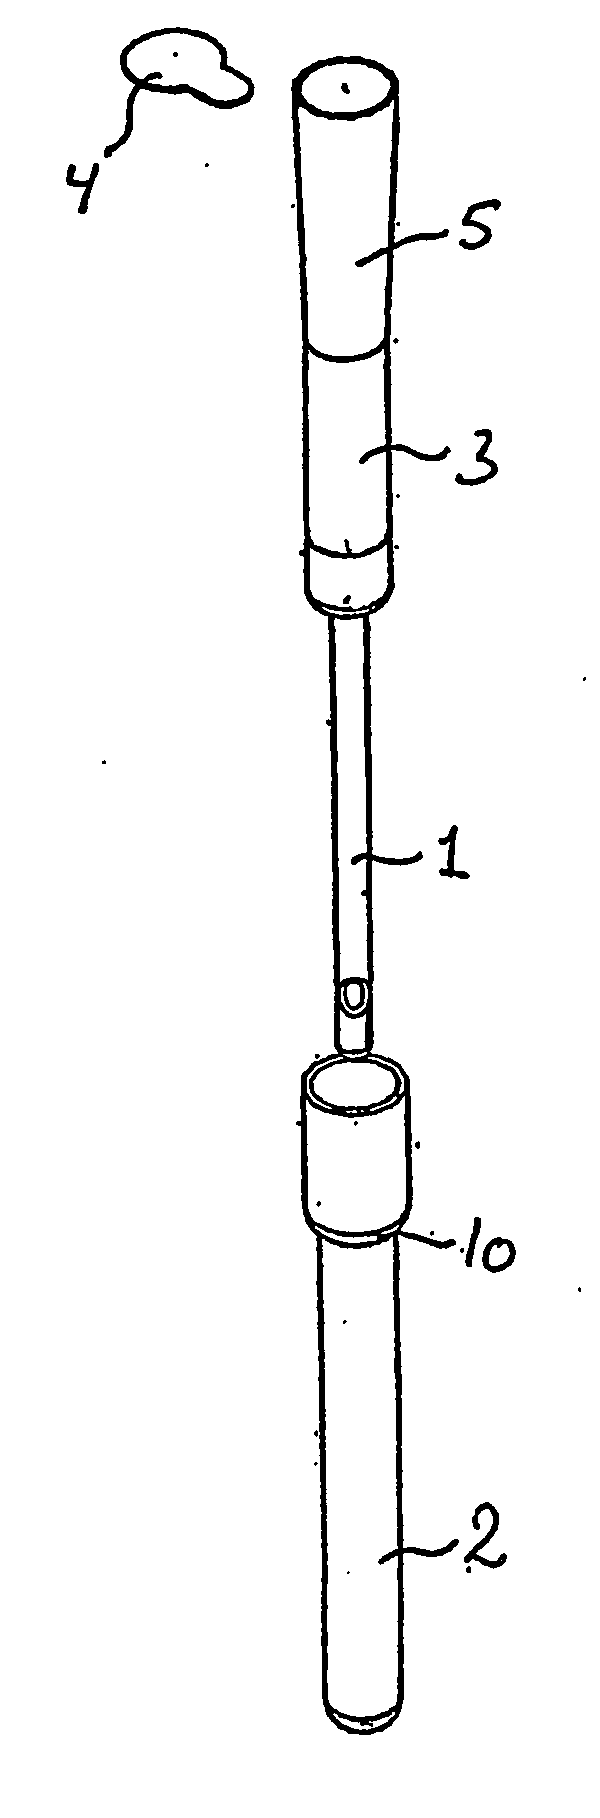 Catheter assembly with catheter handle and container